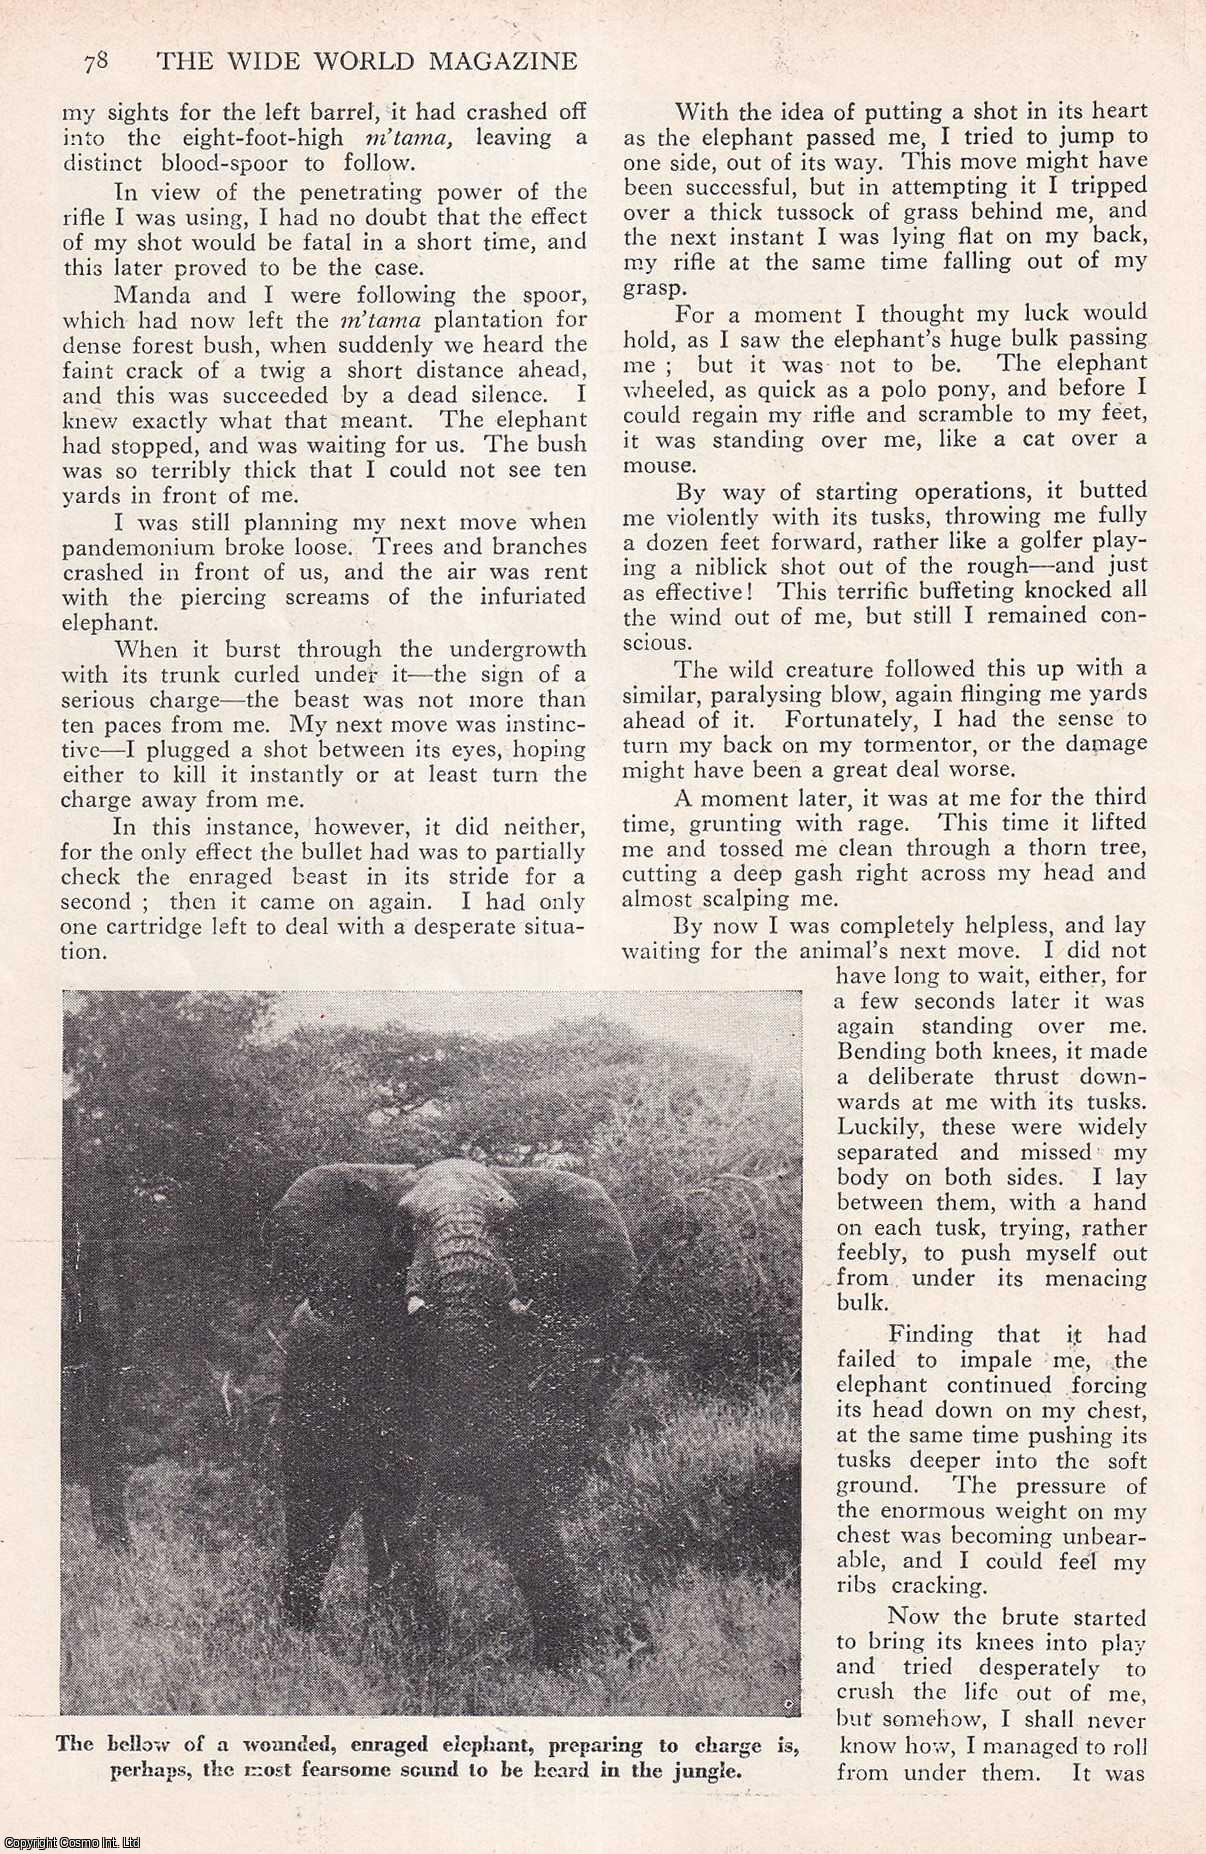 ELEPHANT HUNTING - An Elephant should have killed me : hunting a killer elephant in Africa. By T. Murray Smith, M.C. An uncommon original article from the Wide World Magazine, 1960.